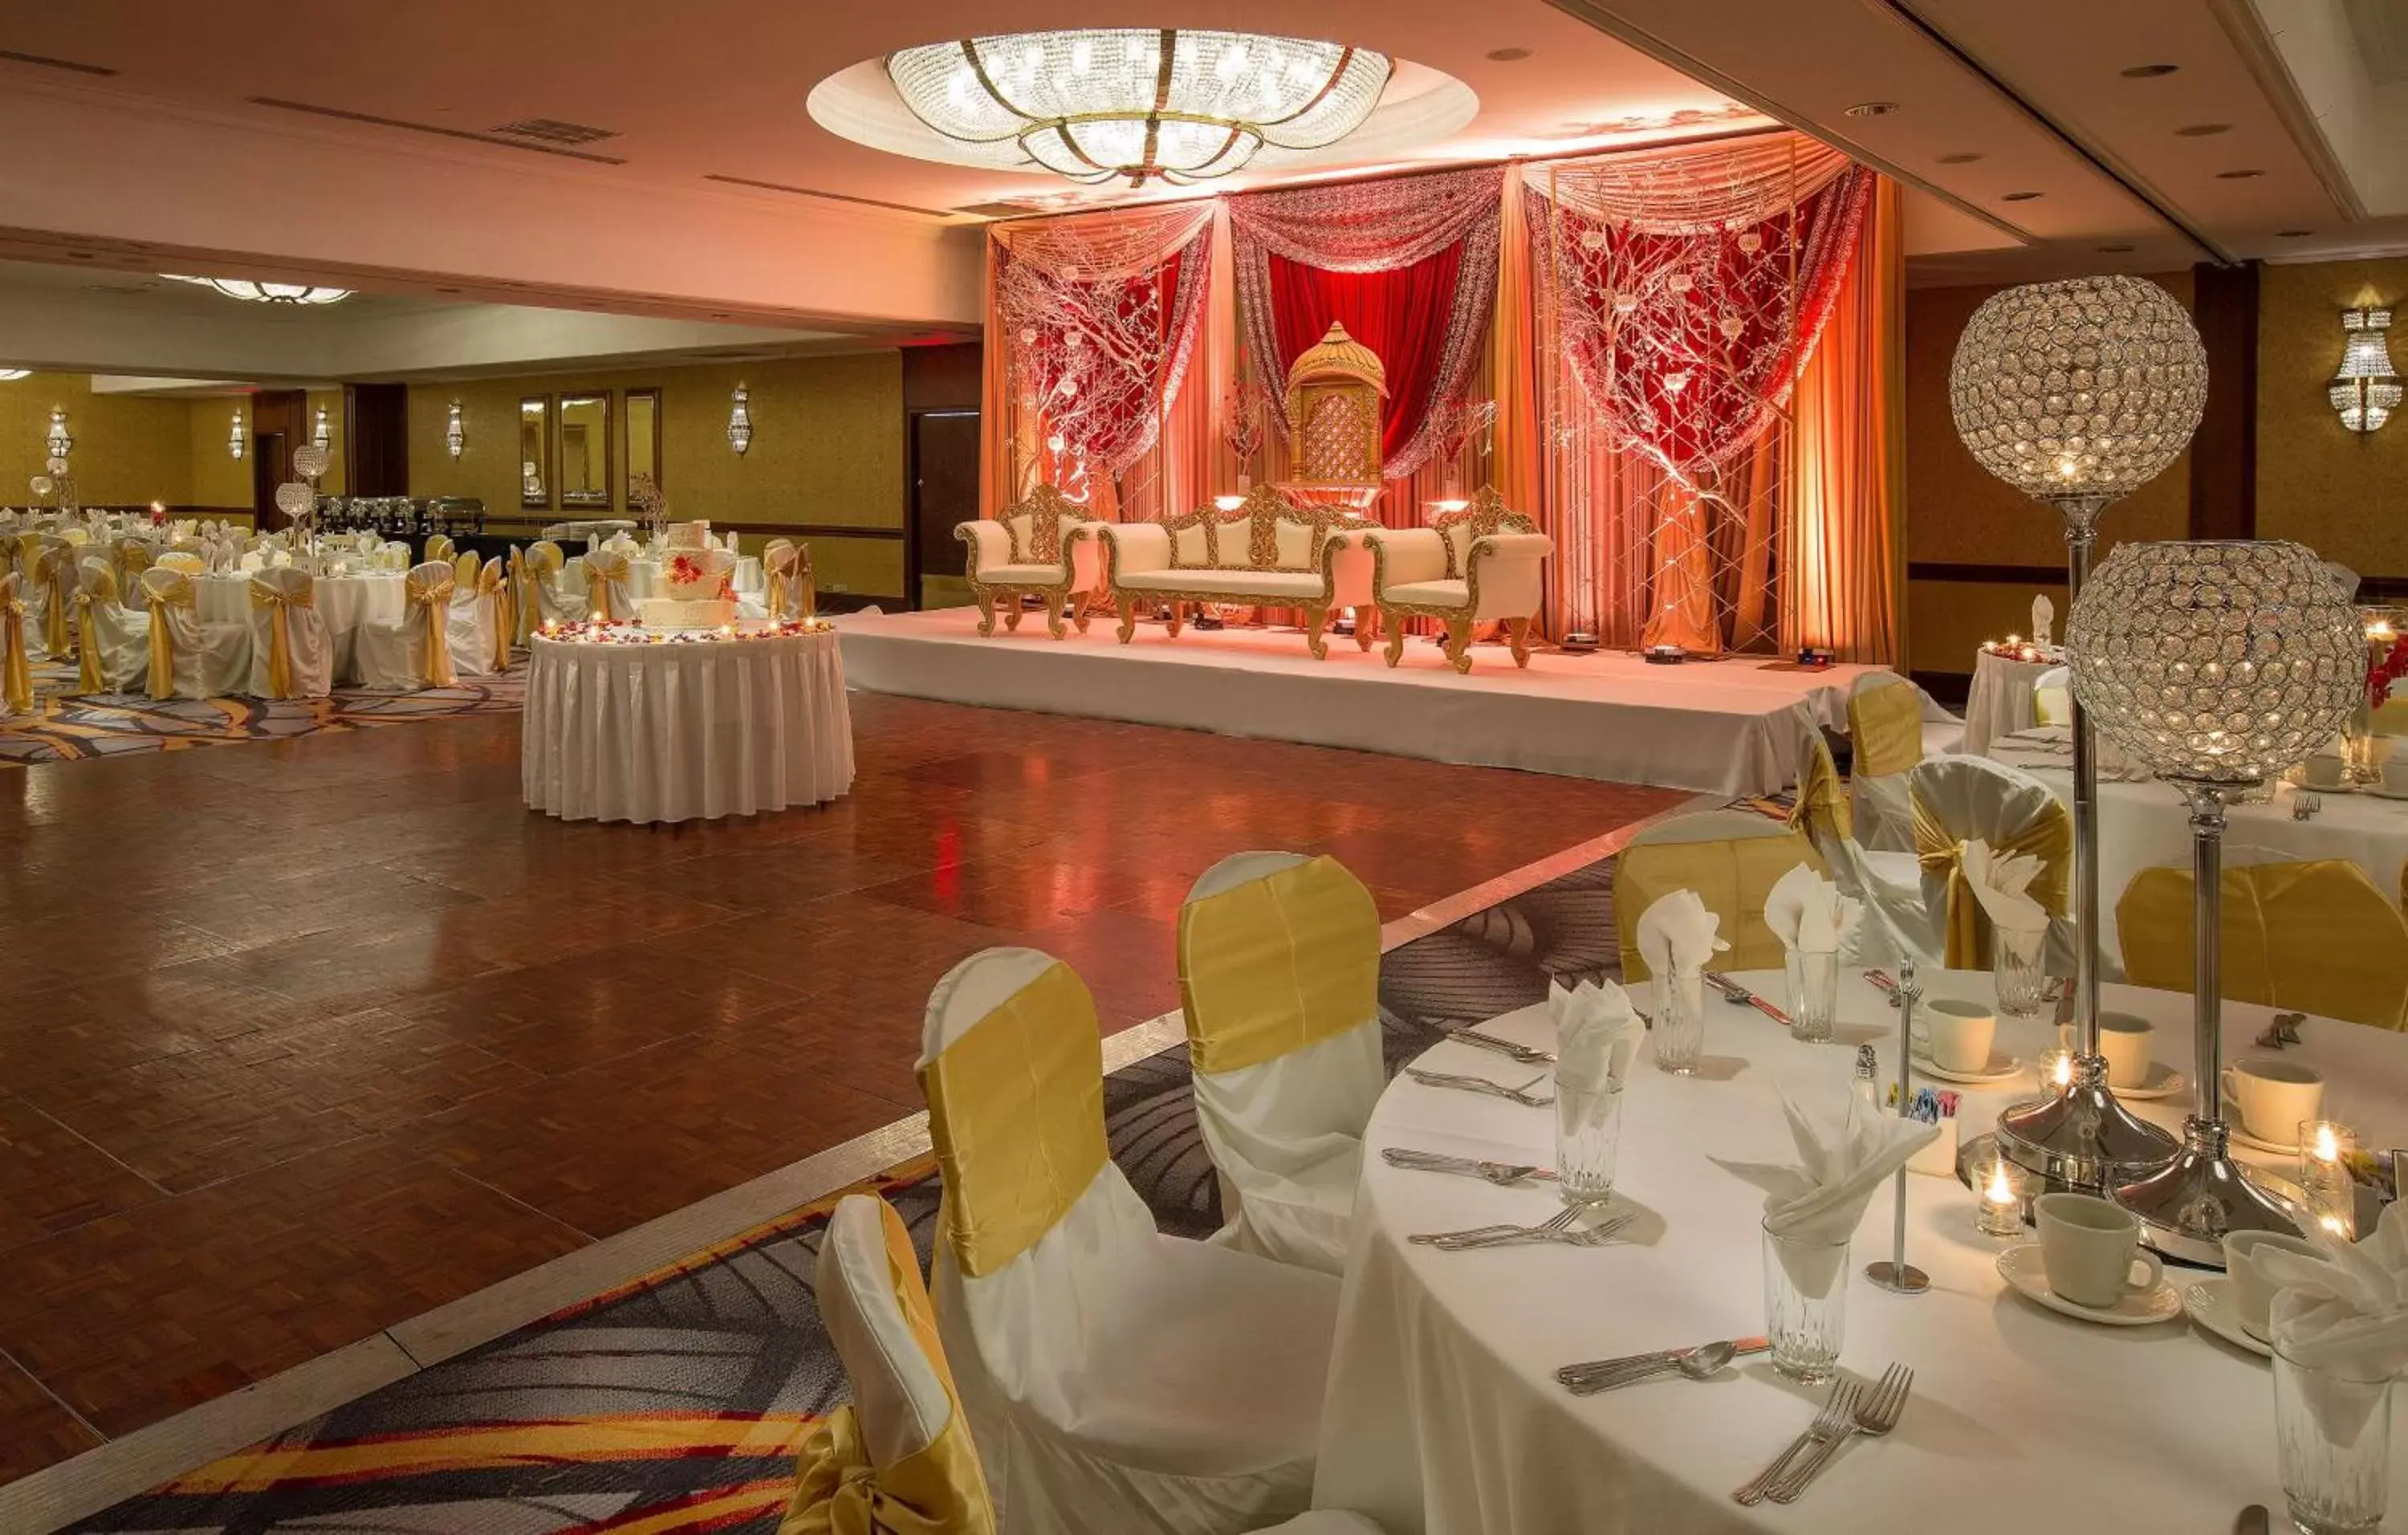 Meeting/conference room, Banquet Facilities in Hilton Chicago/Northbrook